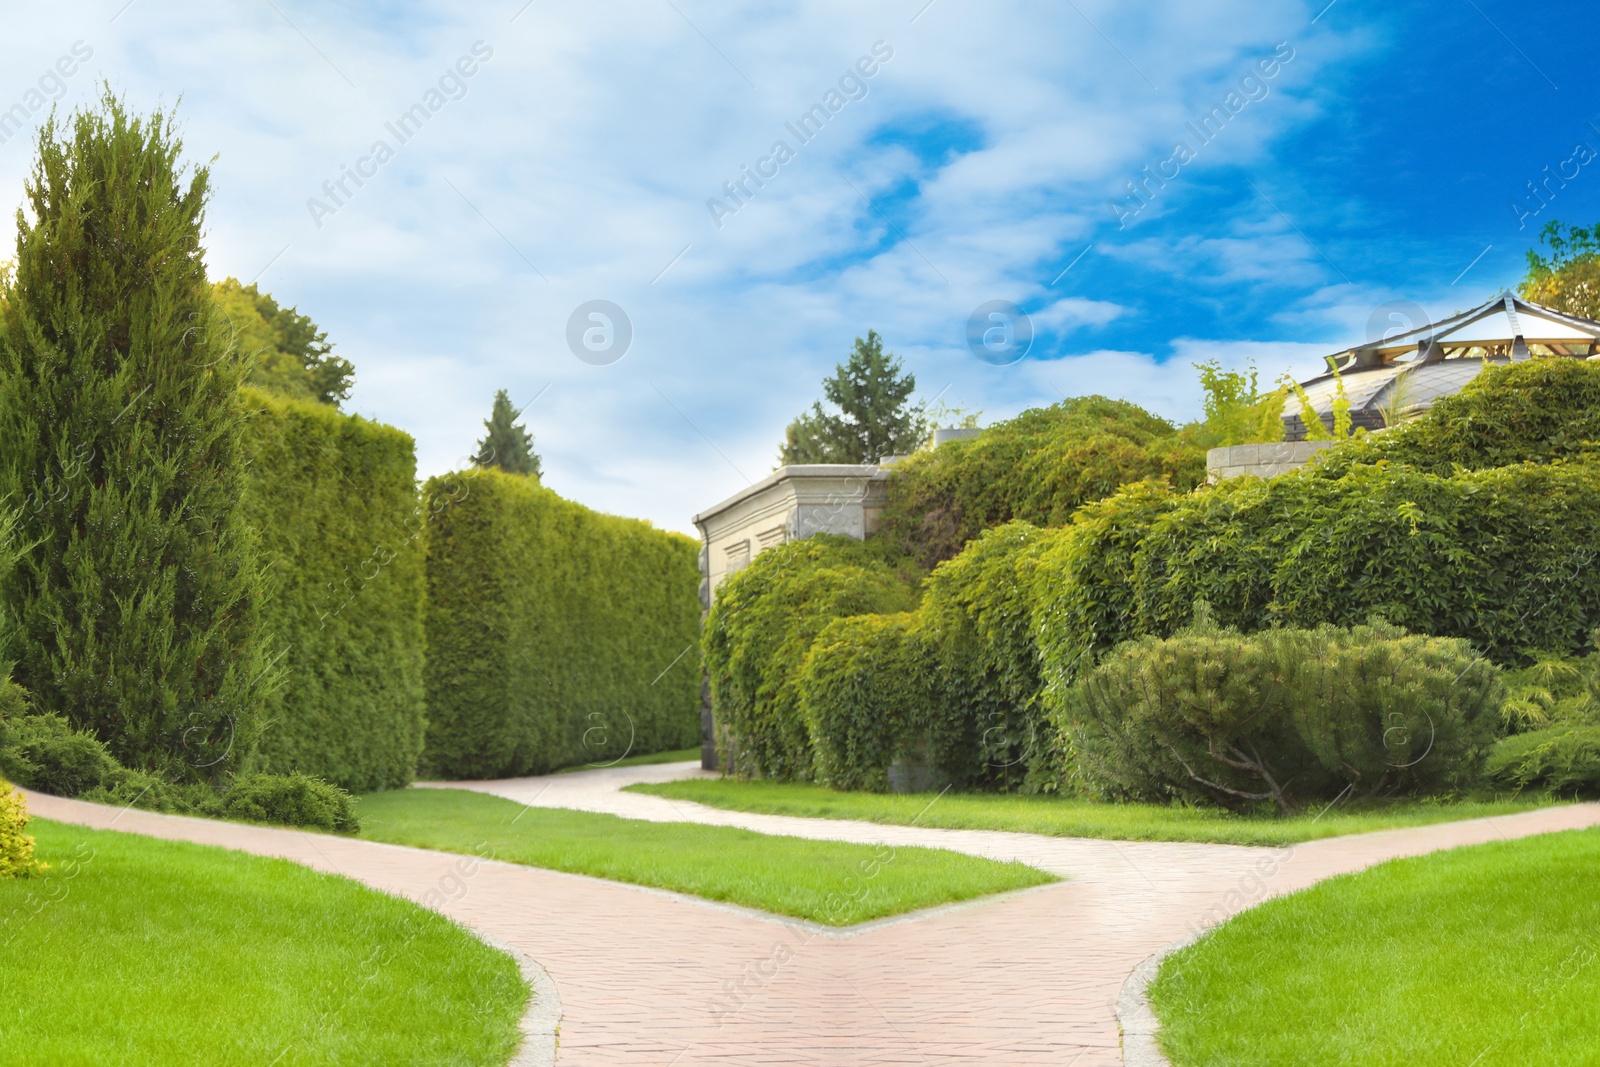 Image of Choosing way. Brick path in garden on sunny day 